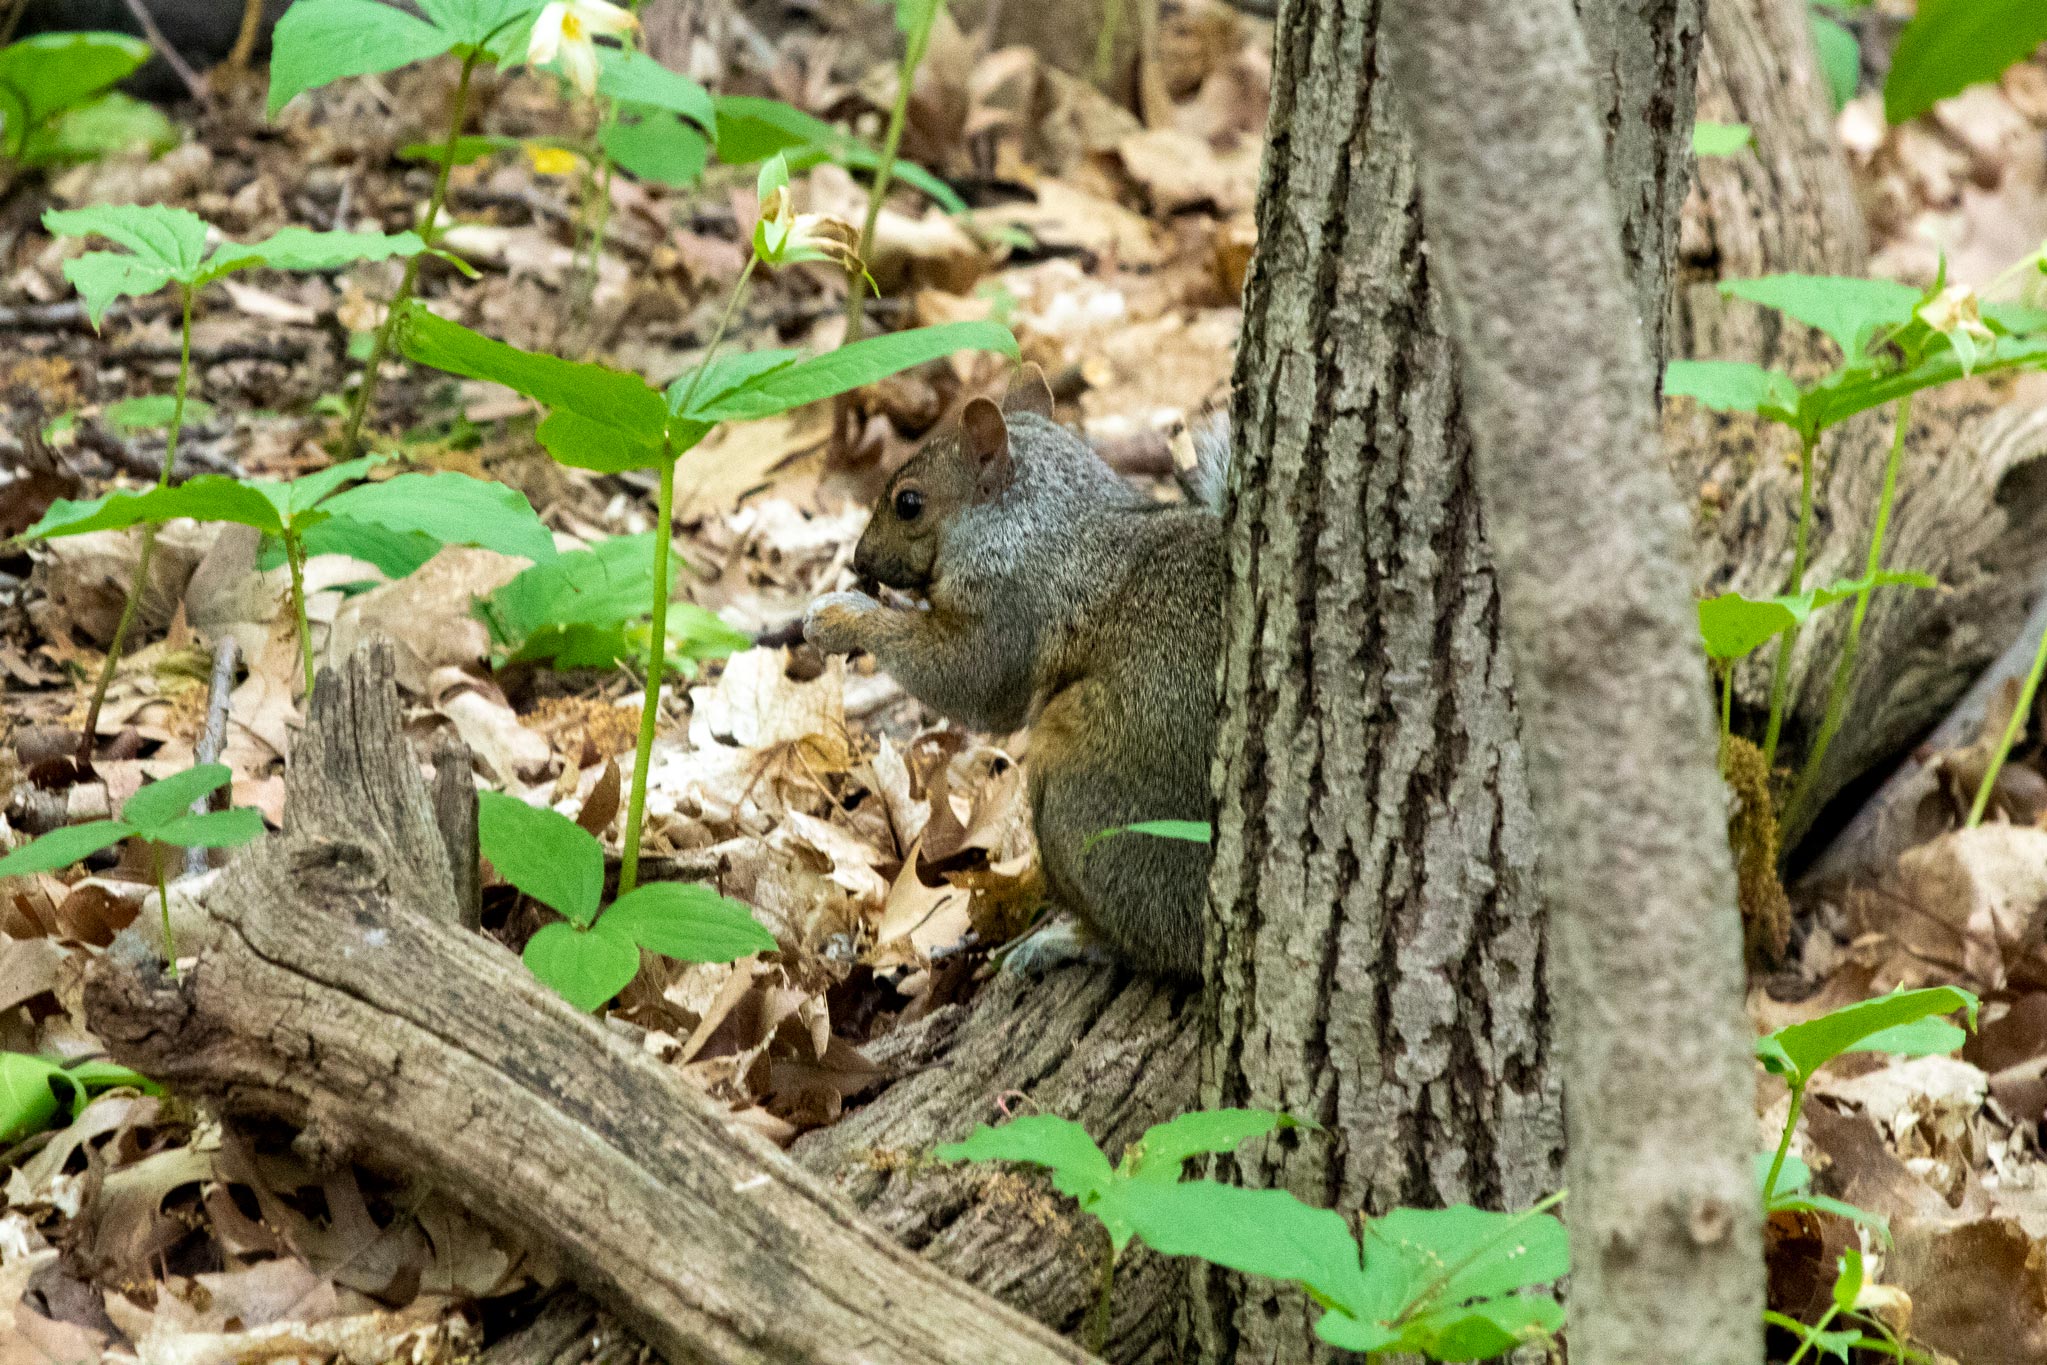 Squirrel on the ground in a forest holding a nut